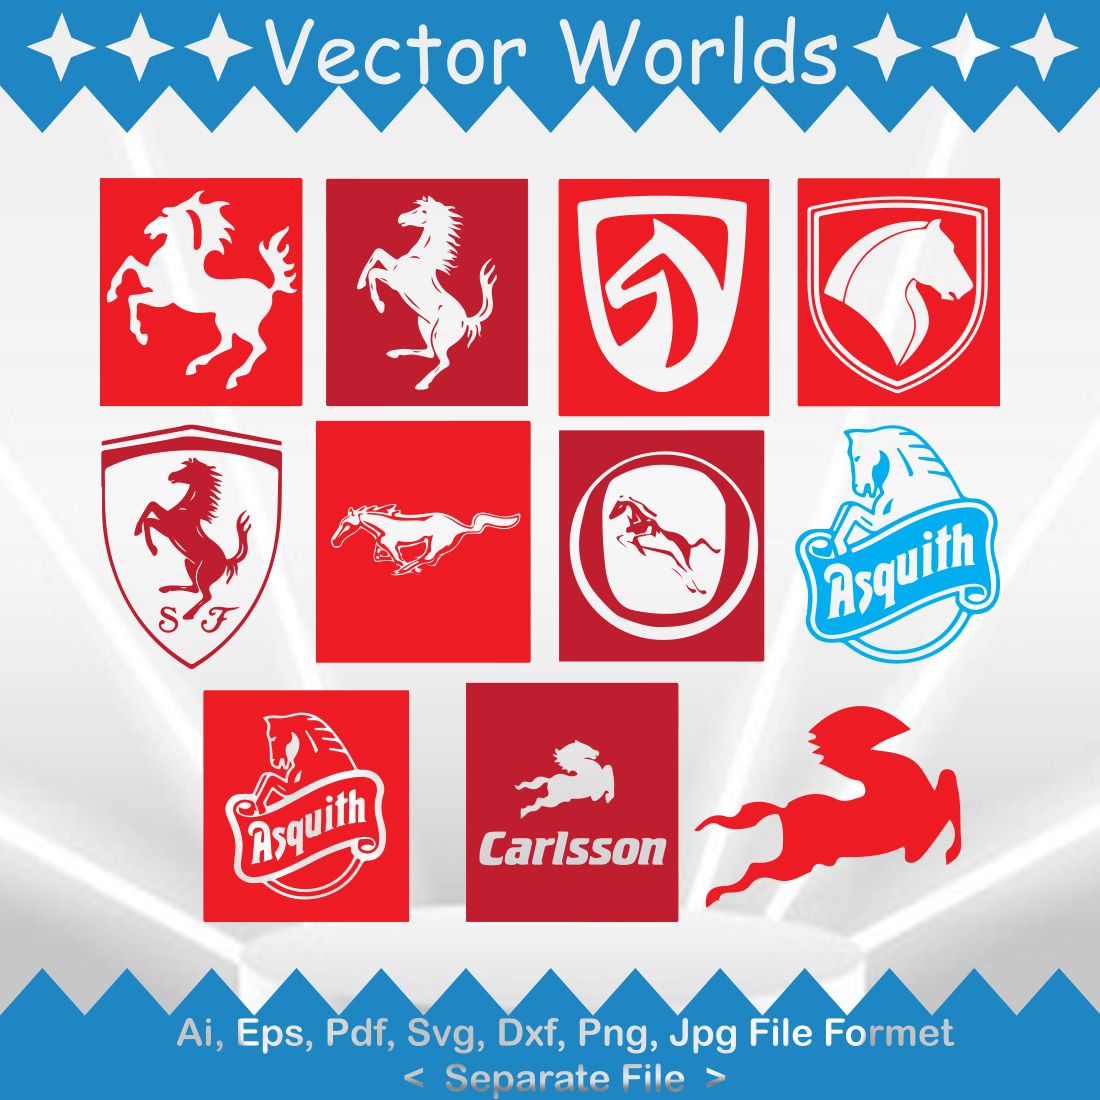 Car Logos with Horse SVG Vector Design cover image.